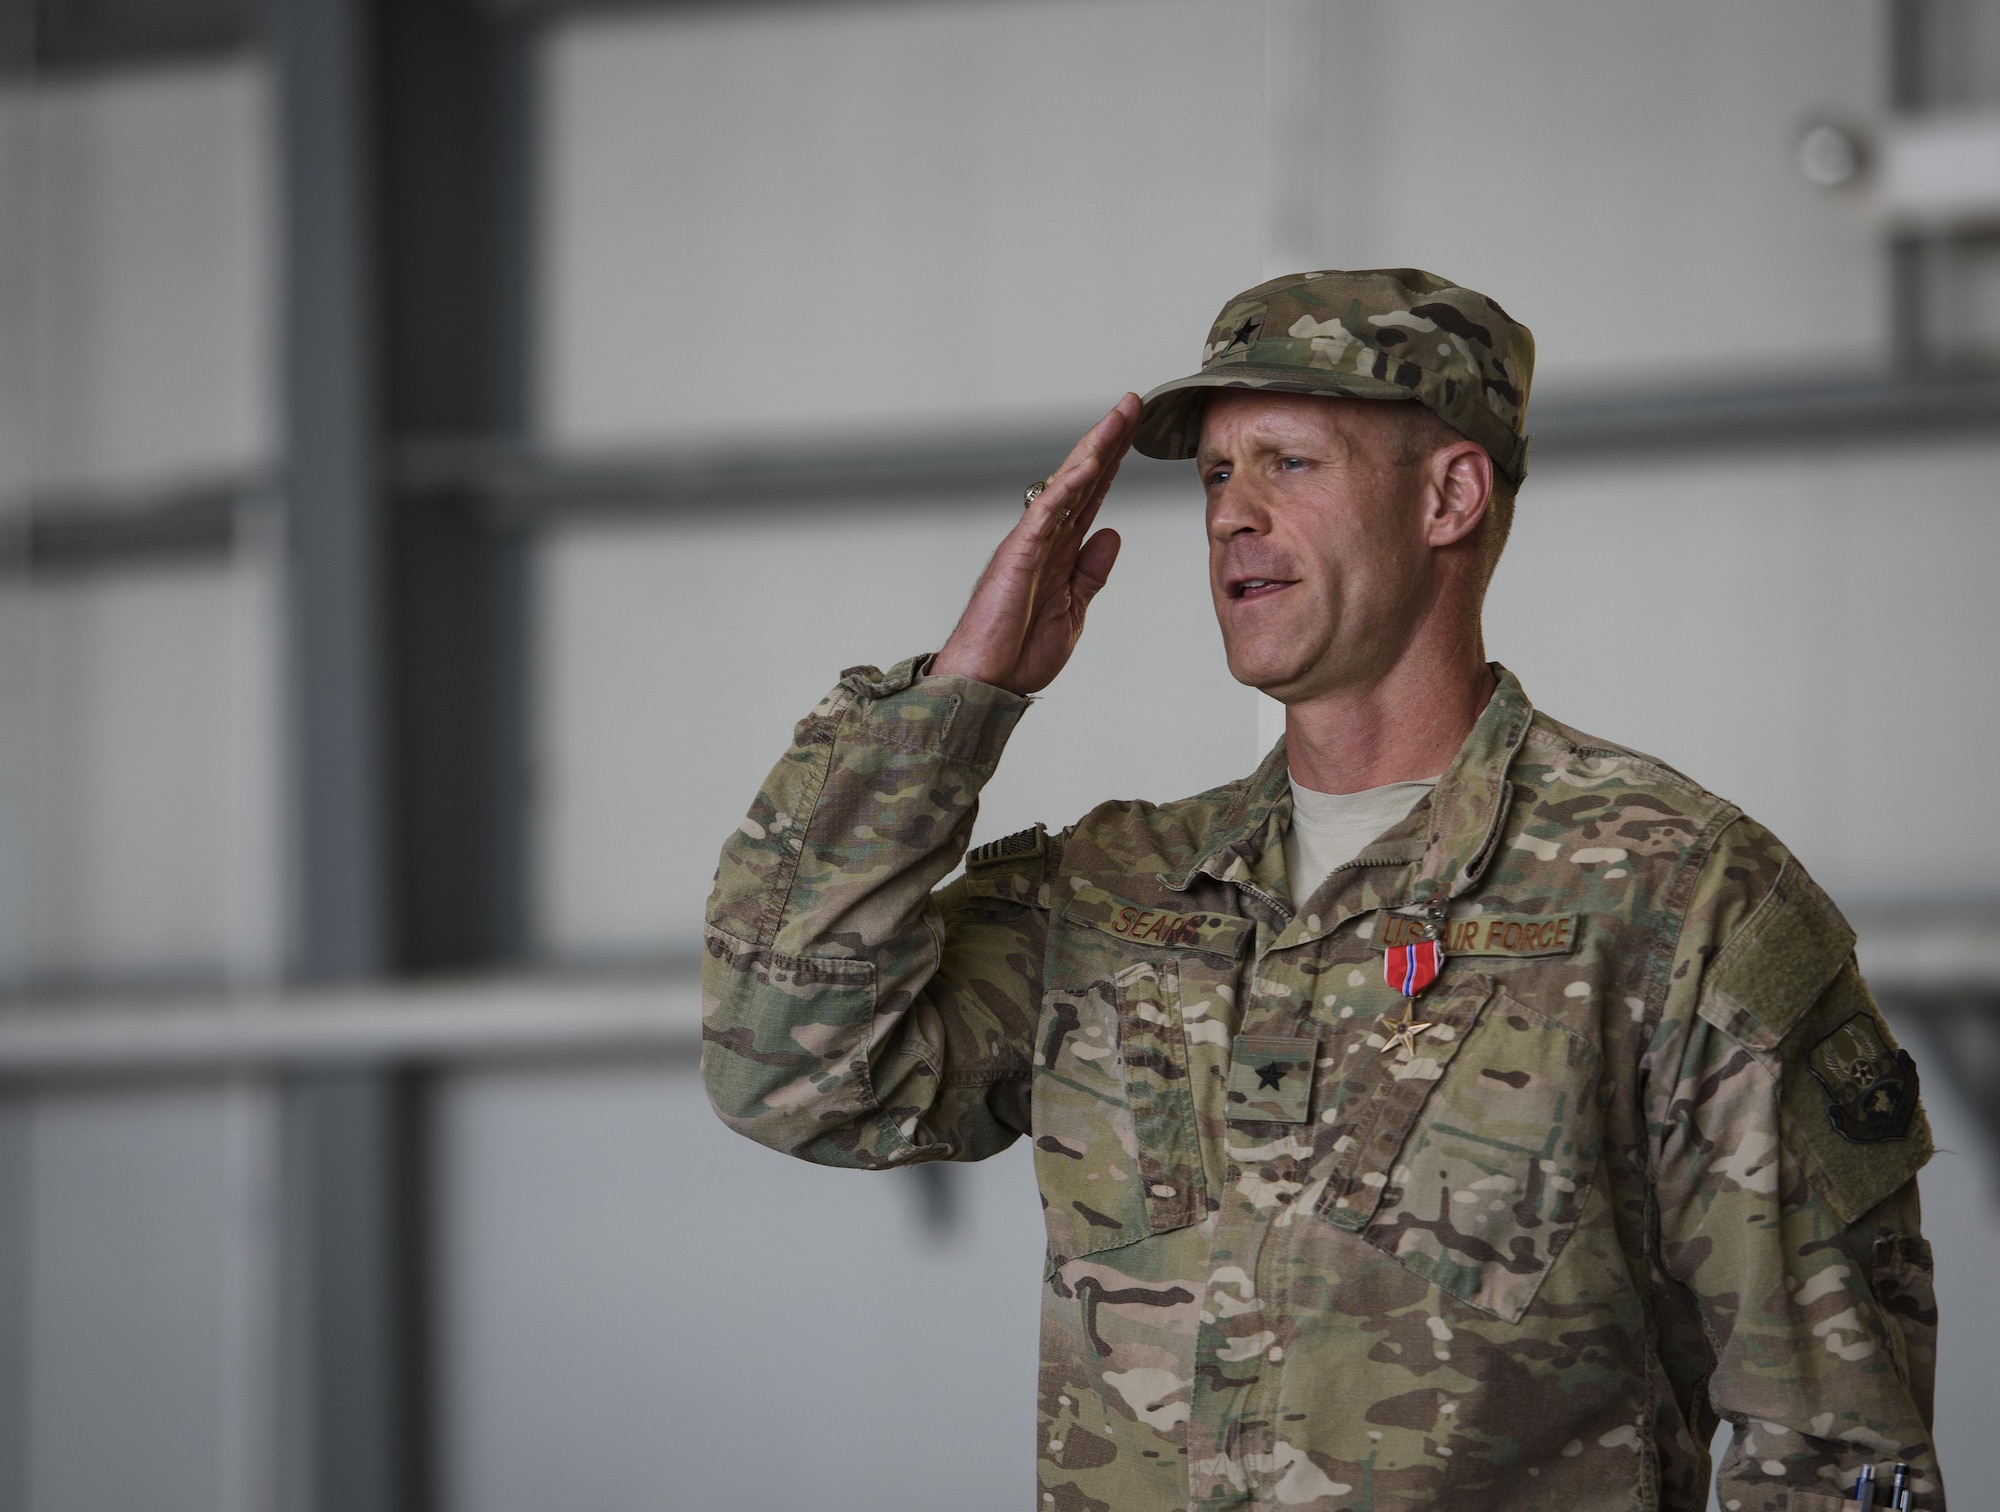 Brig. Gen. Jim Sears renders his final salute as the 455th Air Expeditionary Wing commander during a change of command ceremony at Bagram Airfield, Afghanistan, June 3, 2017. Sears commanded the 455th AEW for the last 12 months. During his time at Bagram, Sears’ leadership enabled 15,800 combat sorties, accumulating to 102,877 combat hours, which resulted in more than 1,369 kinetic strike and 2,836 enemies killed in action. (U.S. Air Force photo by Staff Sgt. Benjamin Gonsier) 